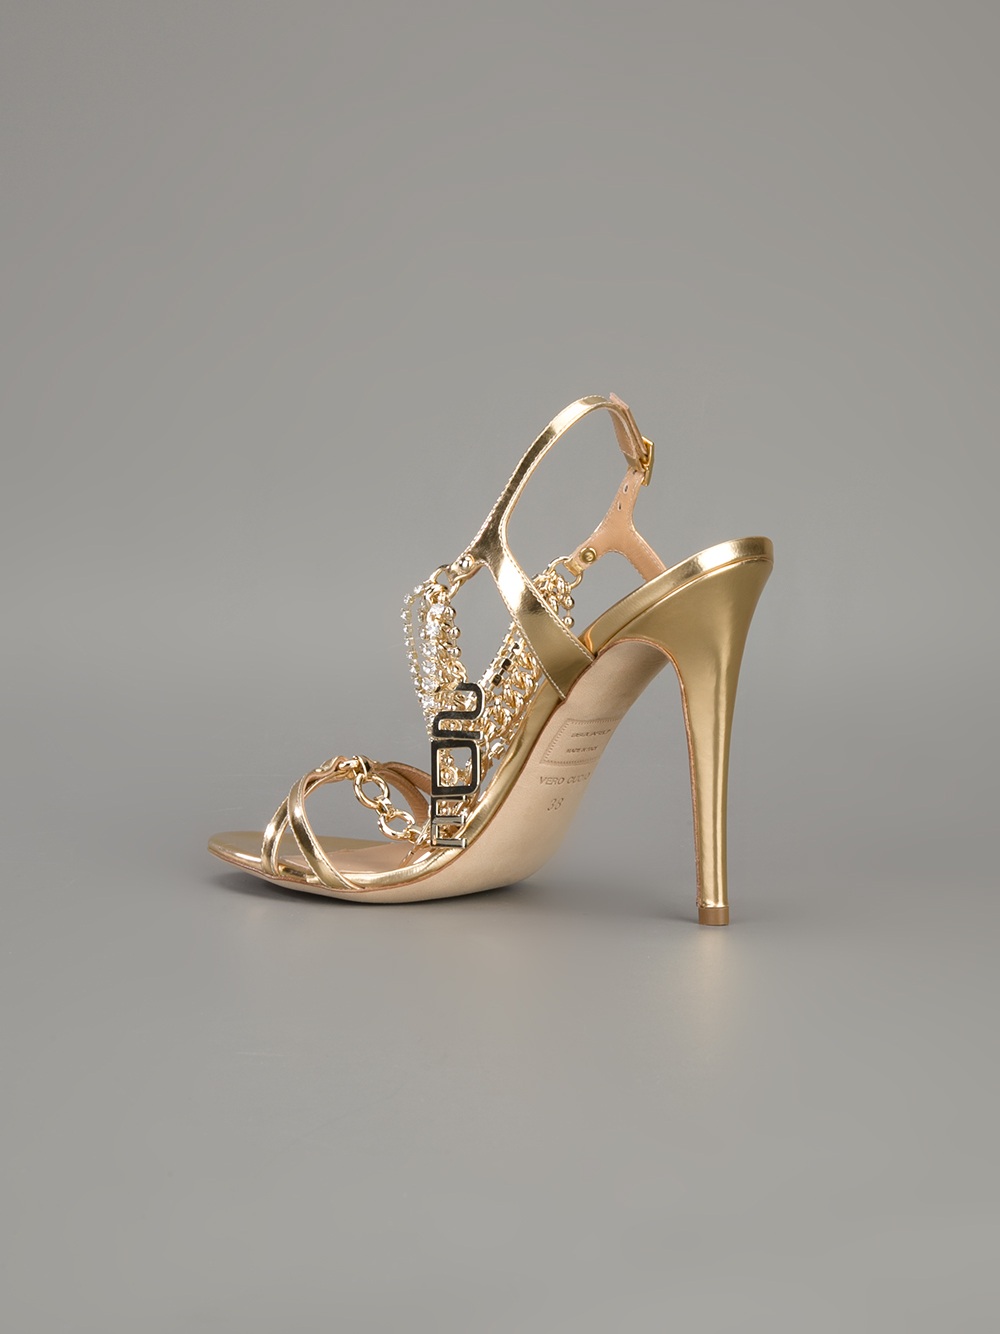 DSquared² Chain Detailed Sandal in Gold (Metallic) - Lyst